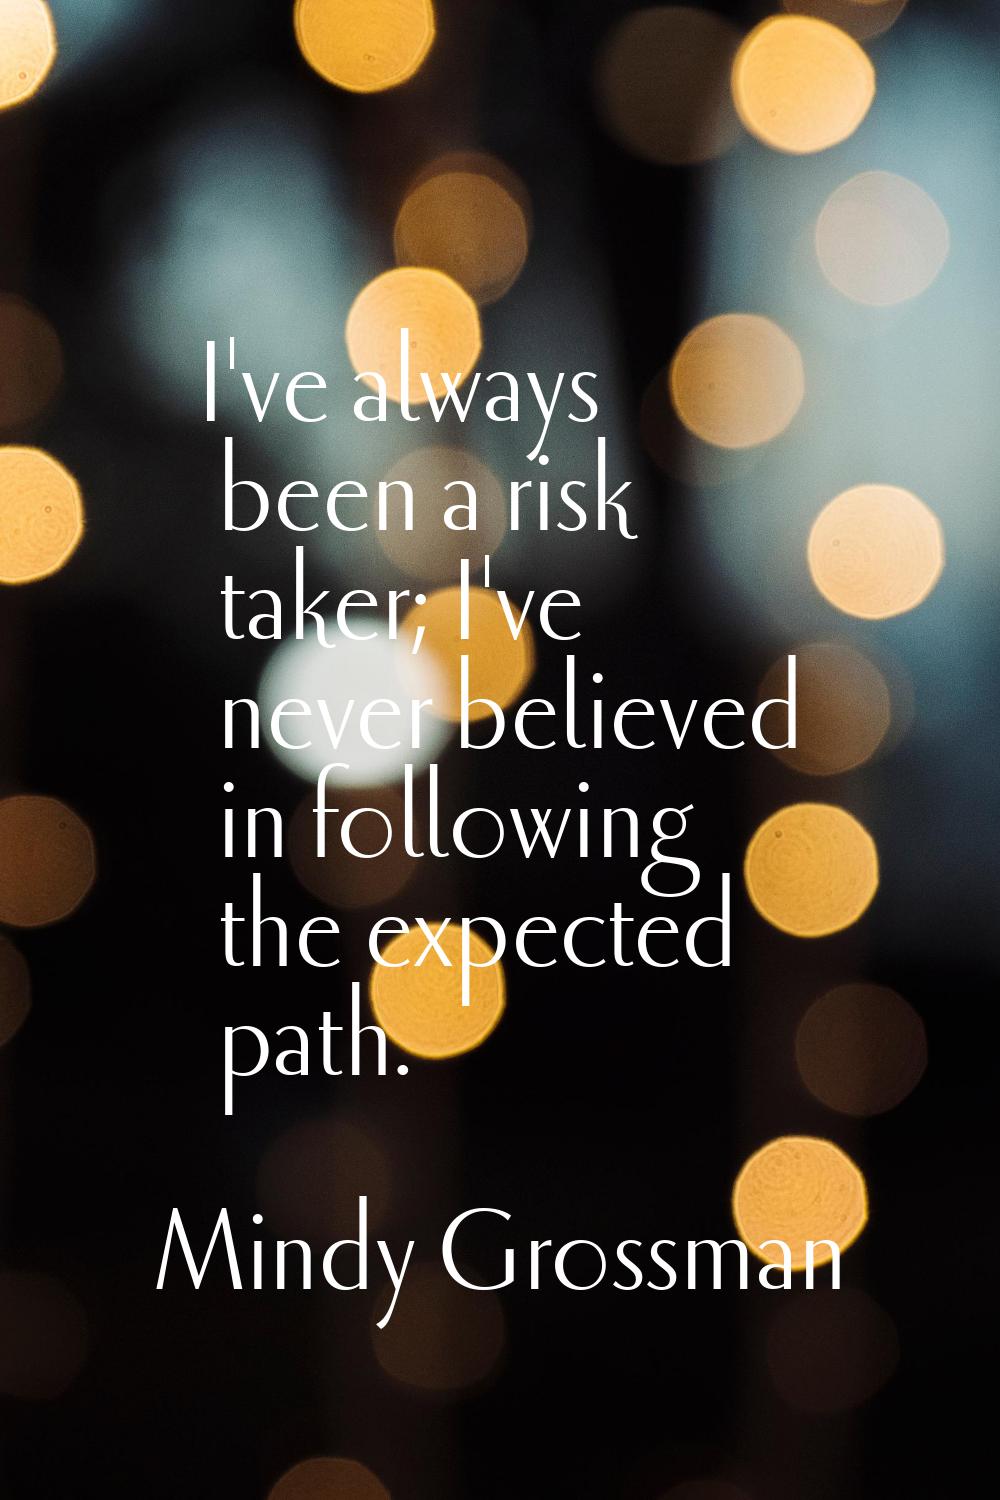 I've always been a risk taker; I've never believed in following the expected path.